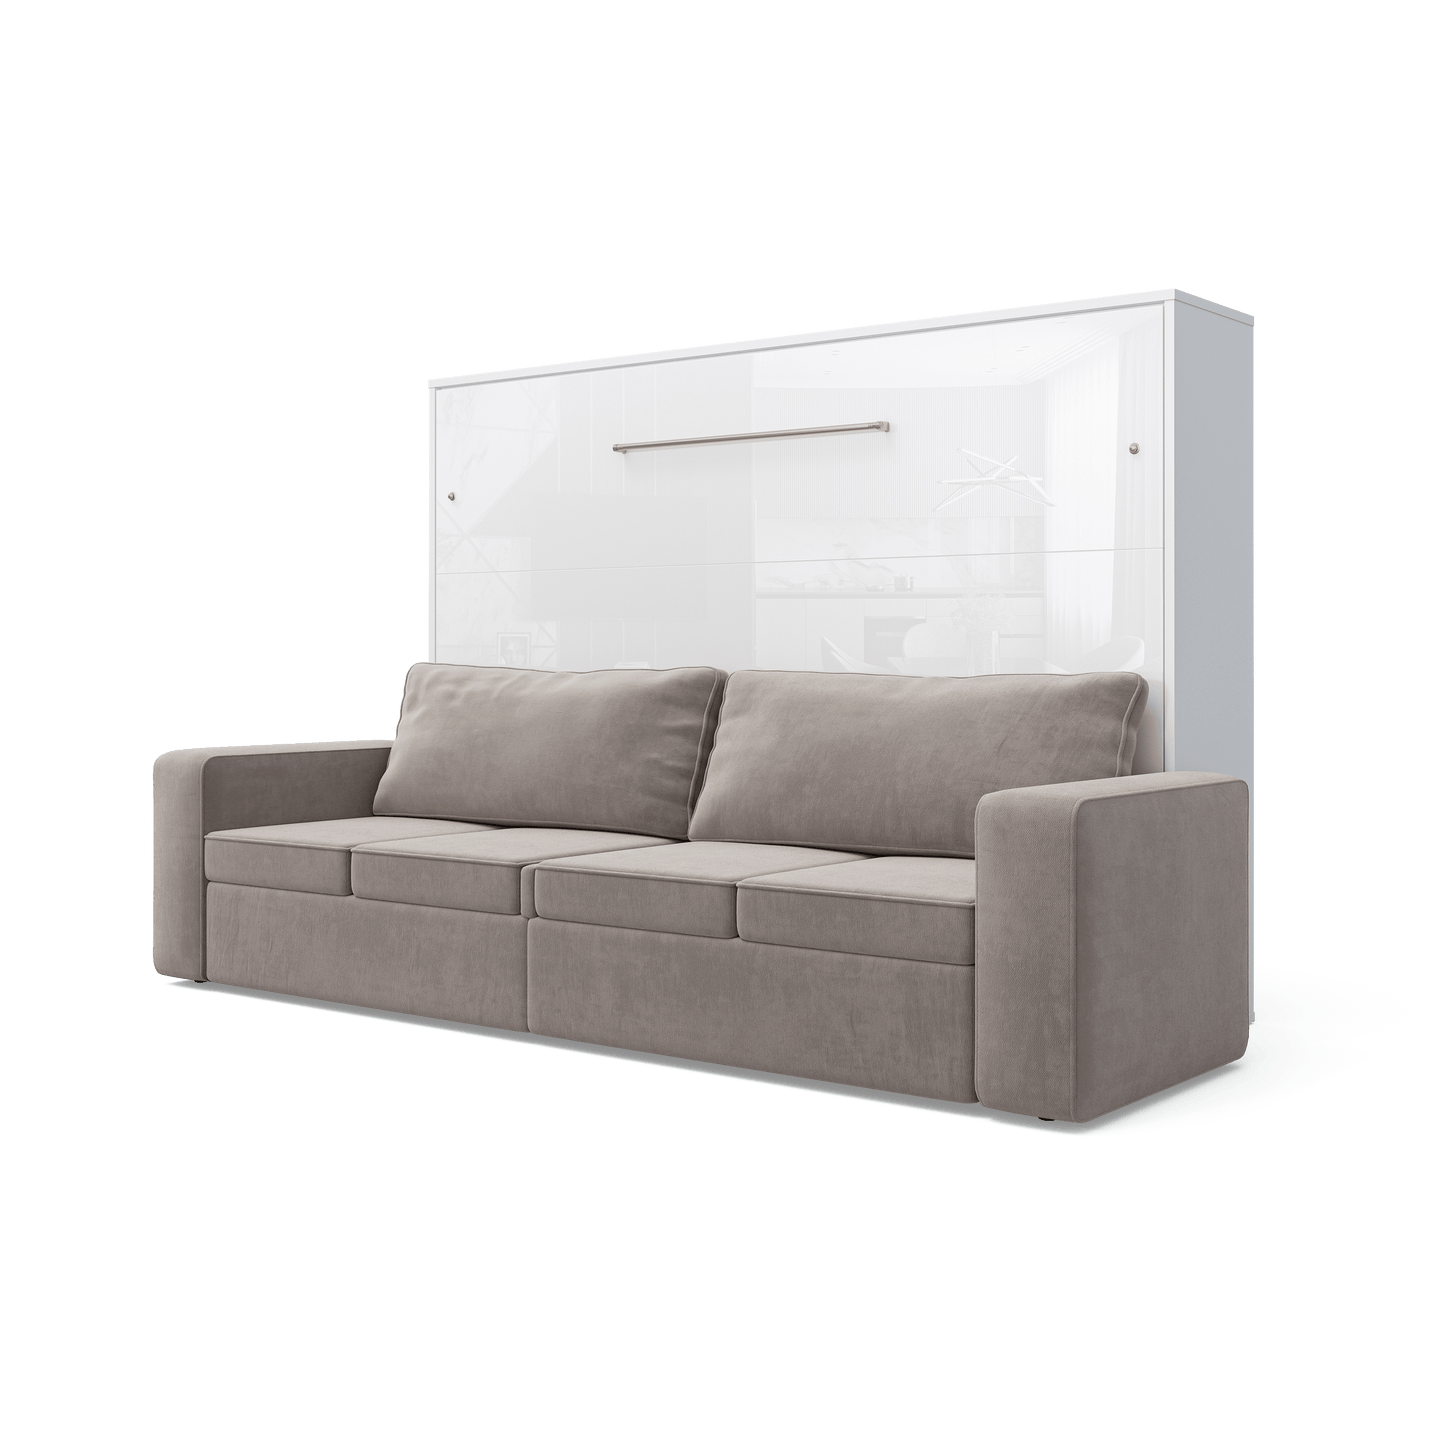 Maxima House Maxima House Horizontal Murphy bed INVENTO with a Sofa, European Queen White/ Beige Sofa IN015W-B